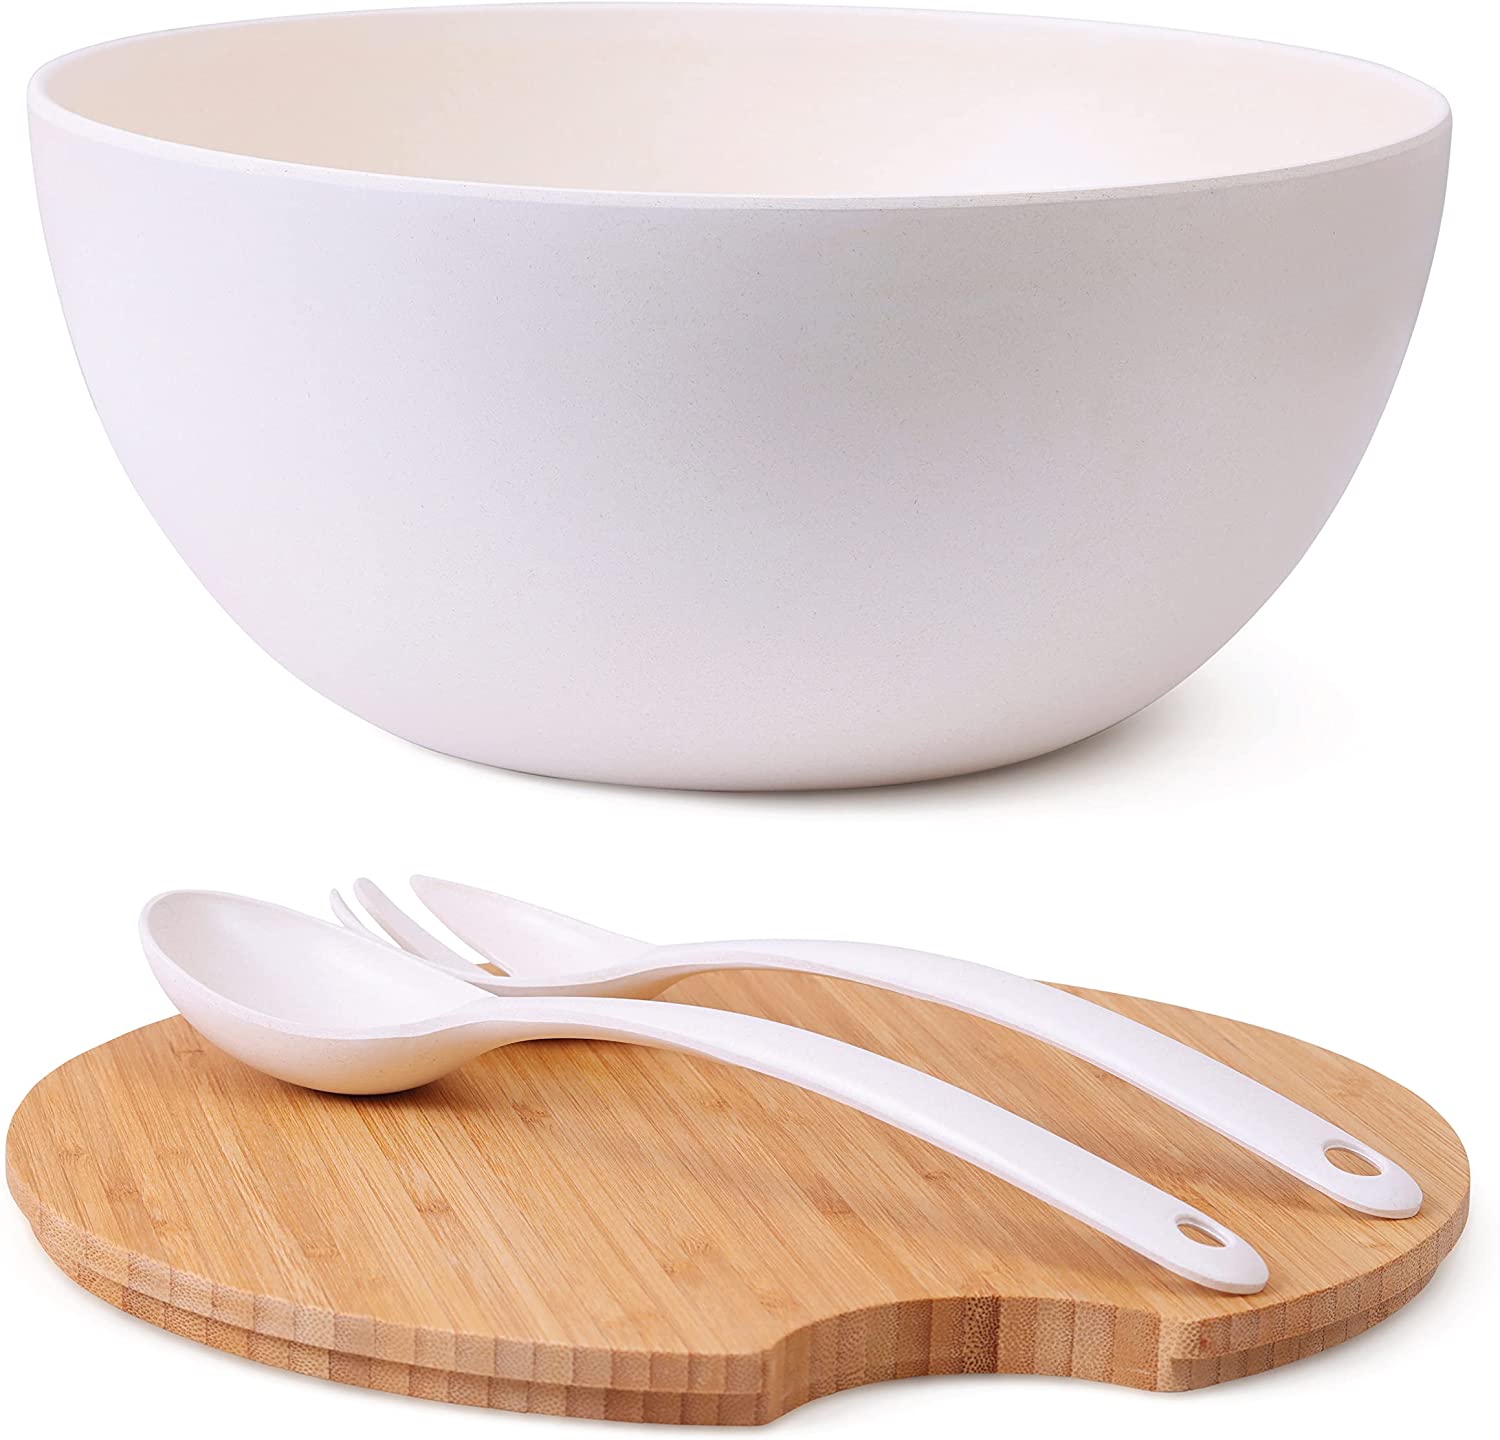 white salad bowl with wooden lid holding utensils